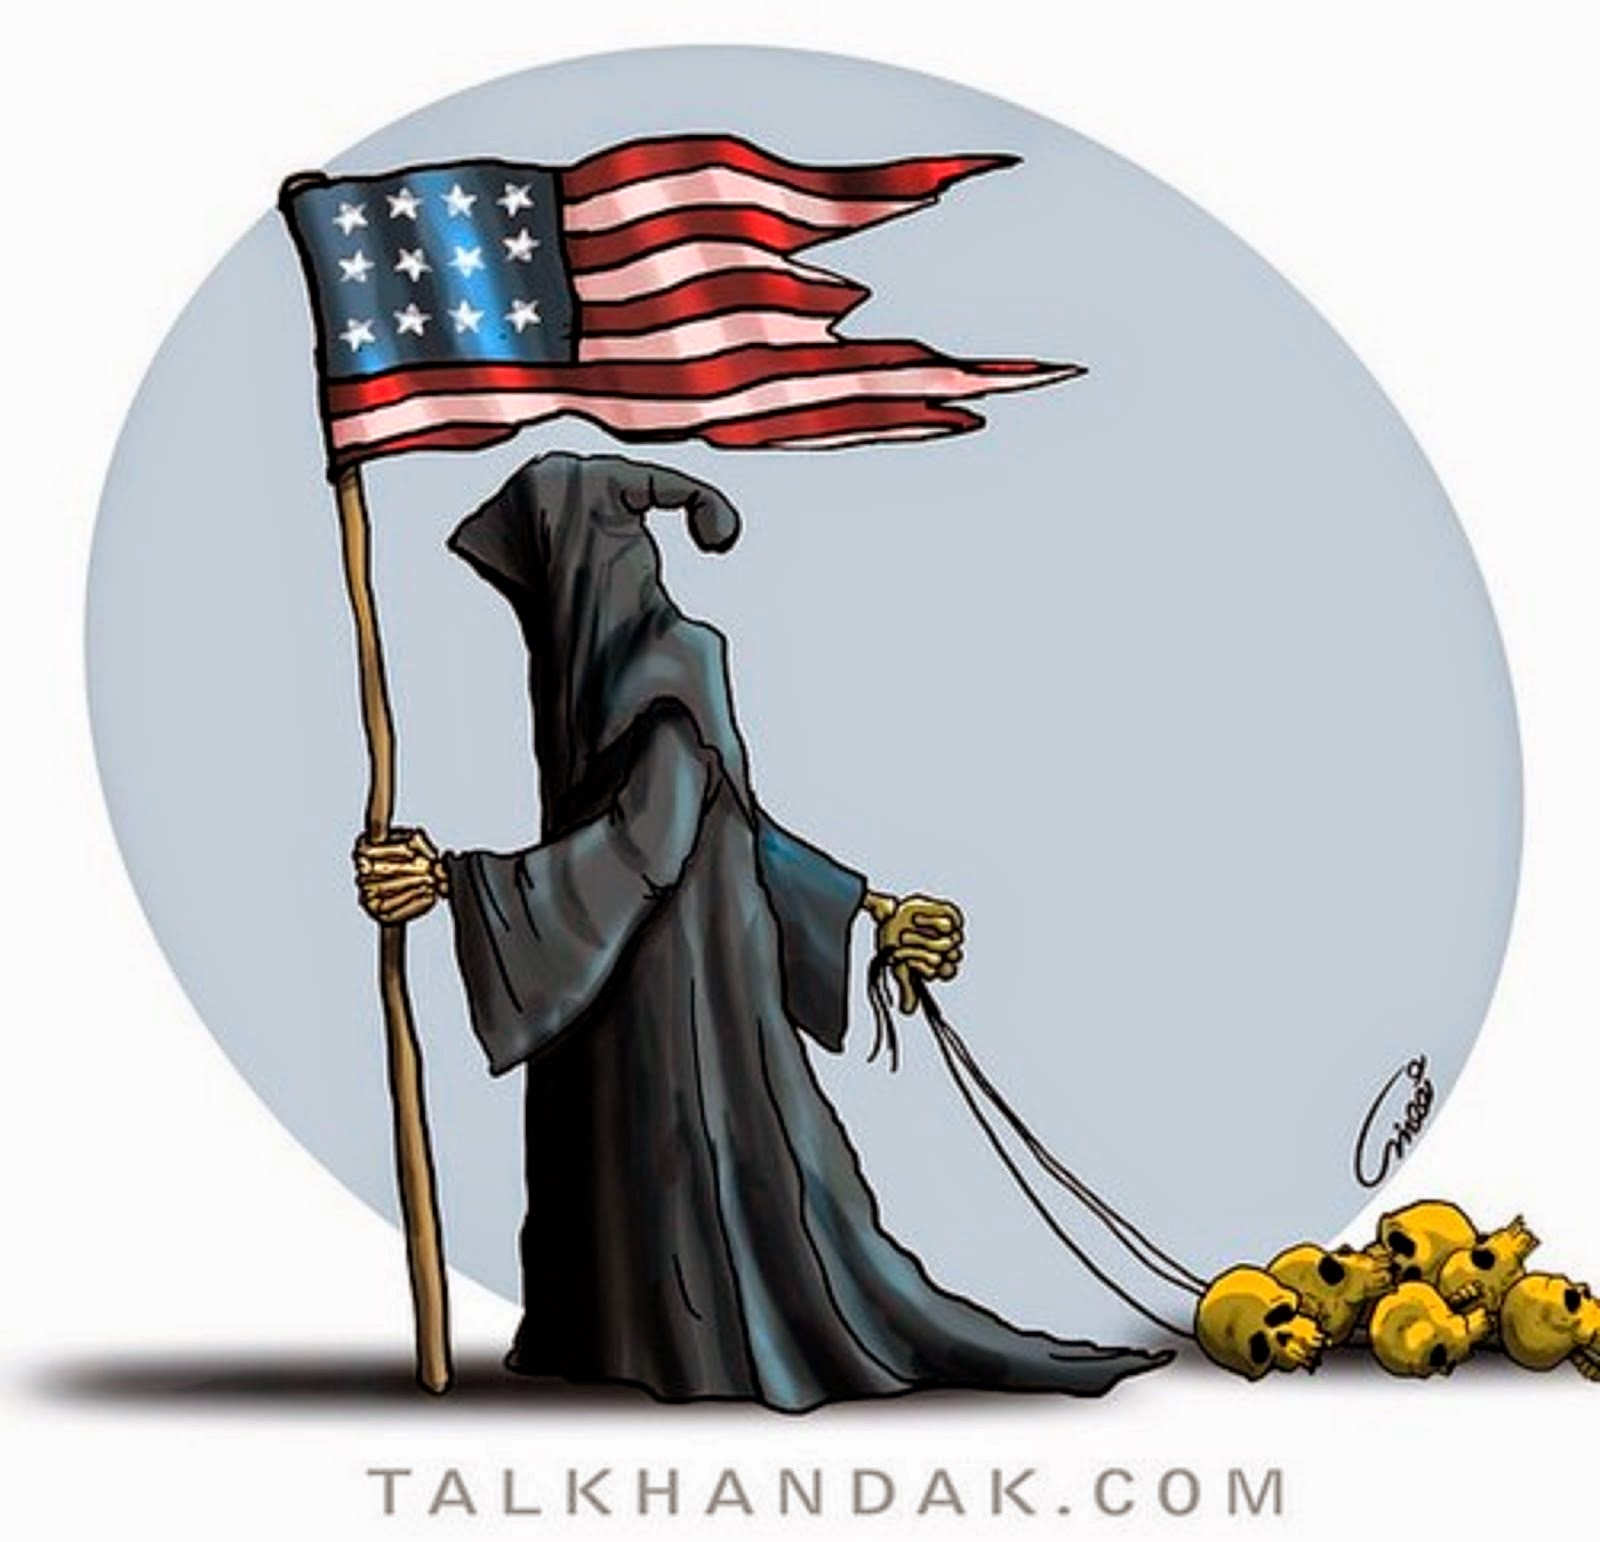 GRIM REAPER WITH THE U.S. FLAG